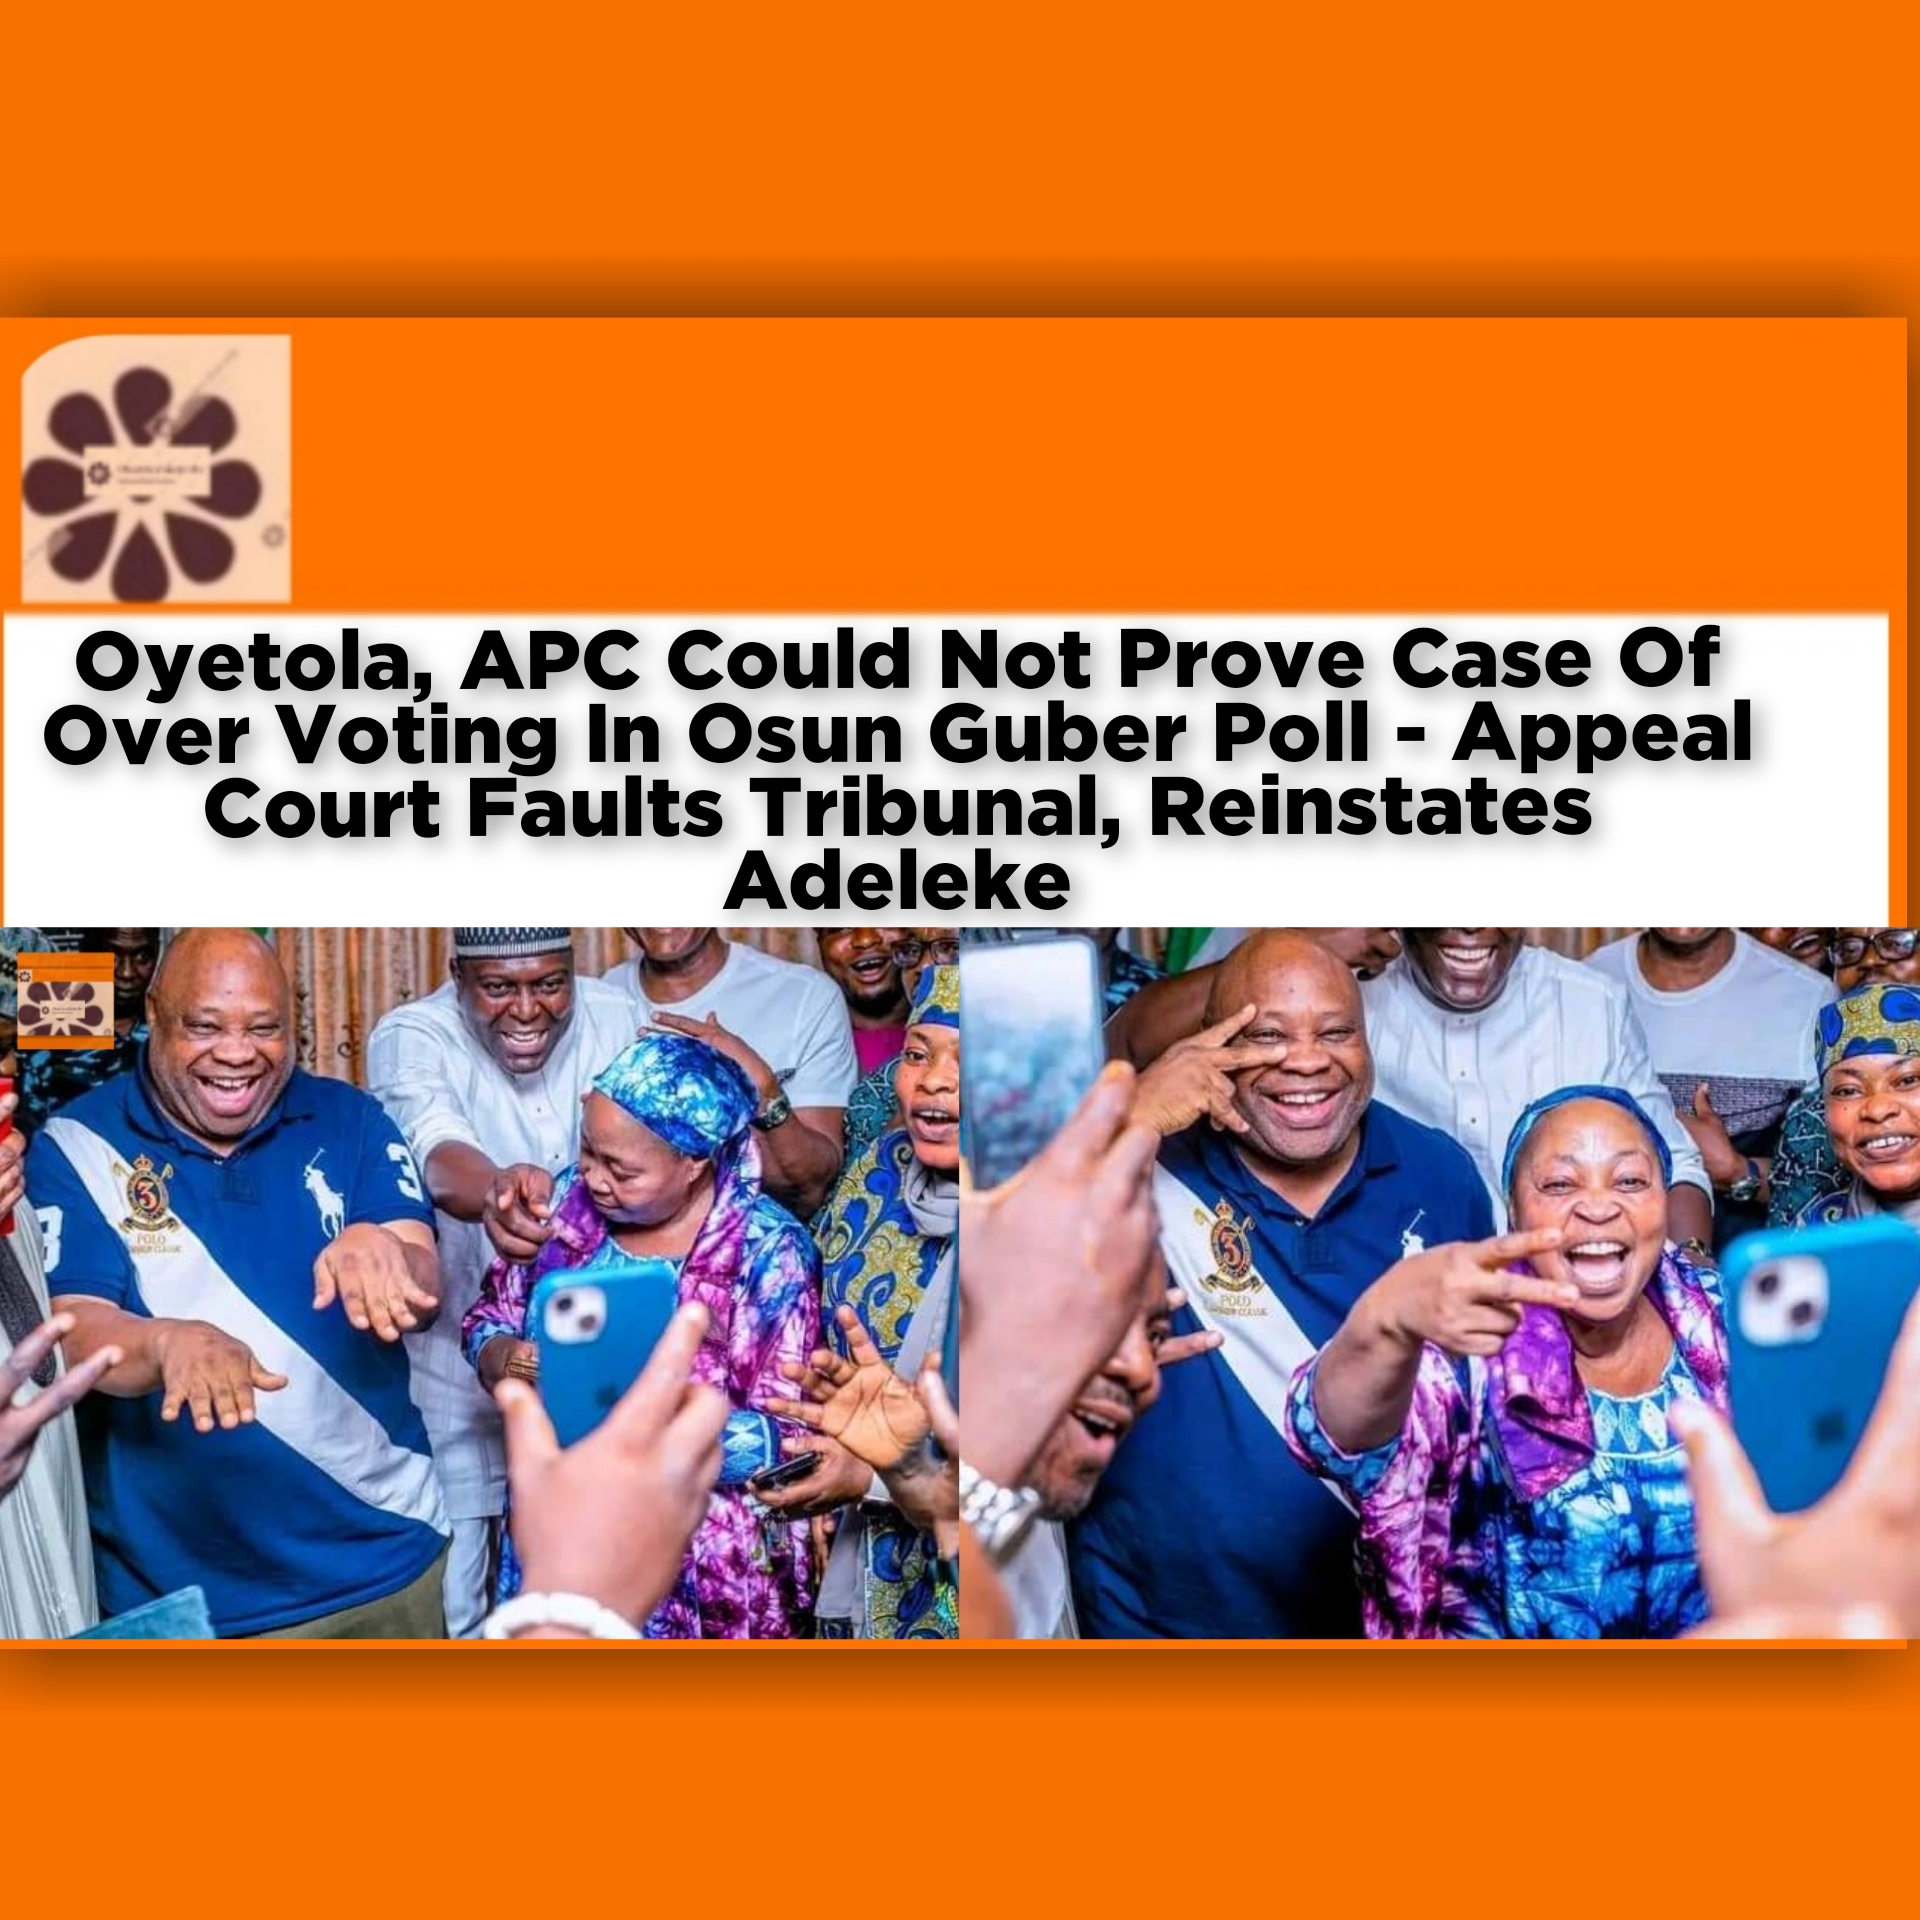 Oyetola, APC Could Not Prove Case Of Over Voting In Osun Guber Poll - Appeal Court Faults Tribunal, Reinstates Adeleke ~ OsazuwaAkonedo #America